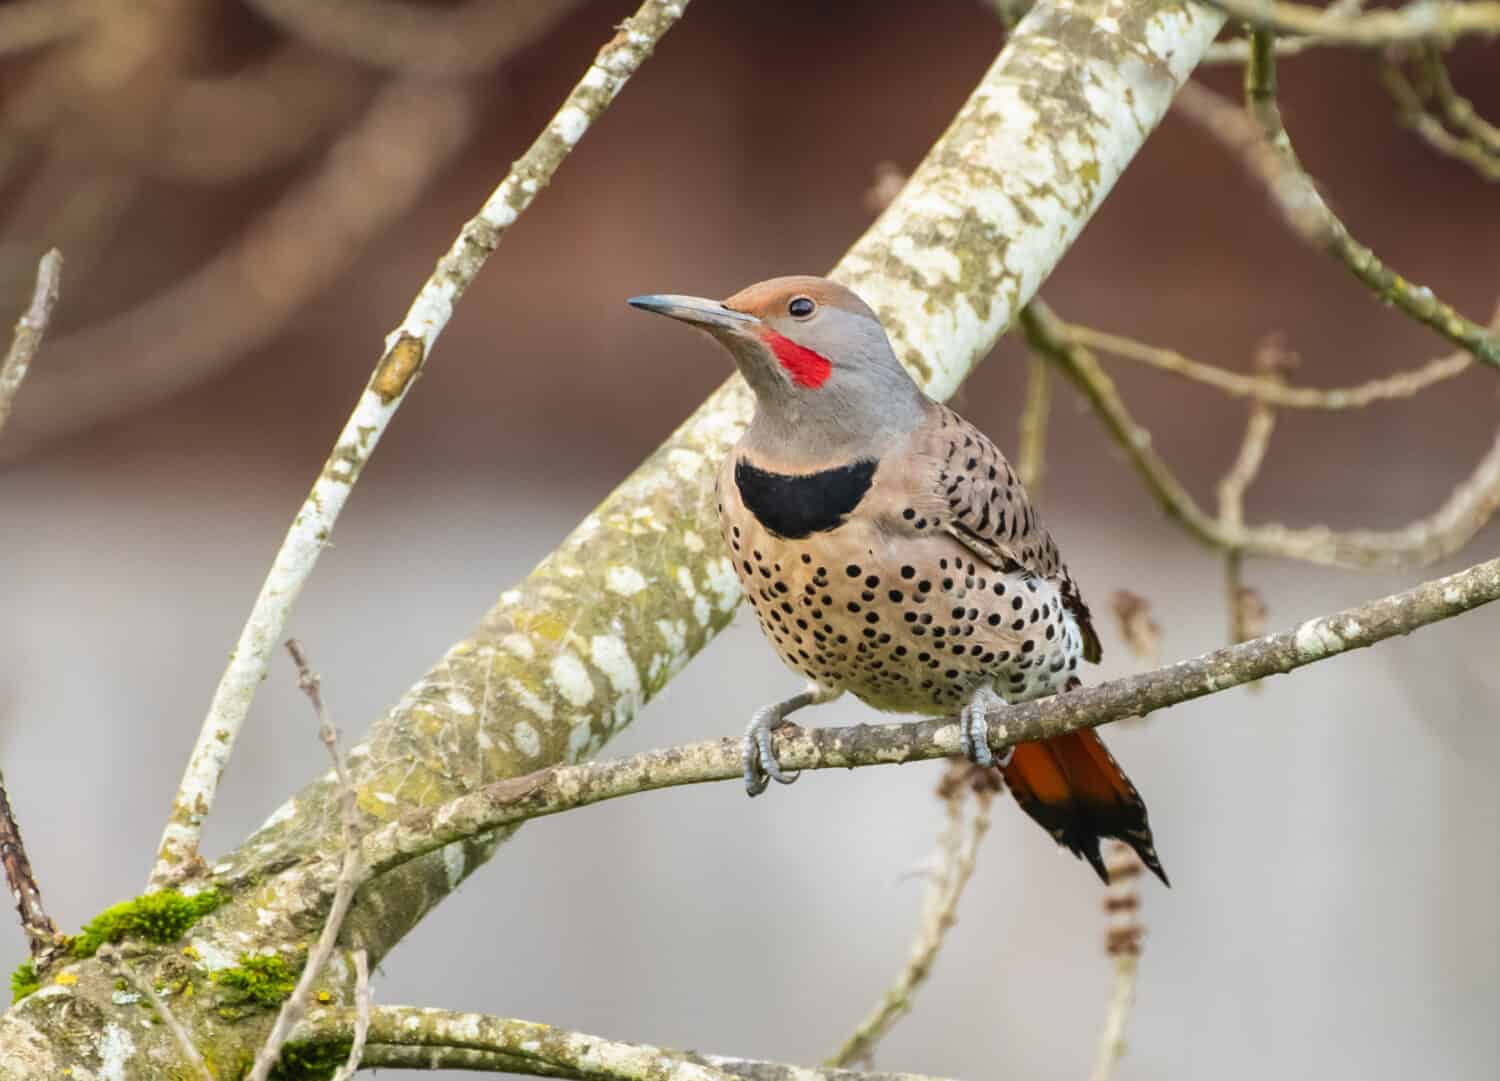 Northern Flicker, perched in a tree, a red-shafted woodpecker (Colaptes auratus)